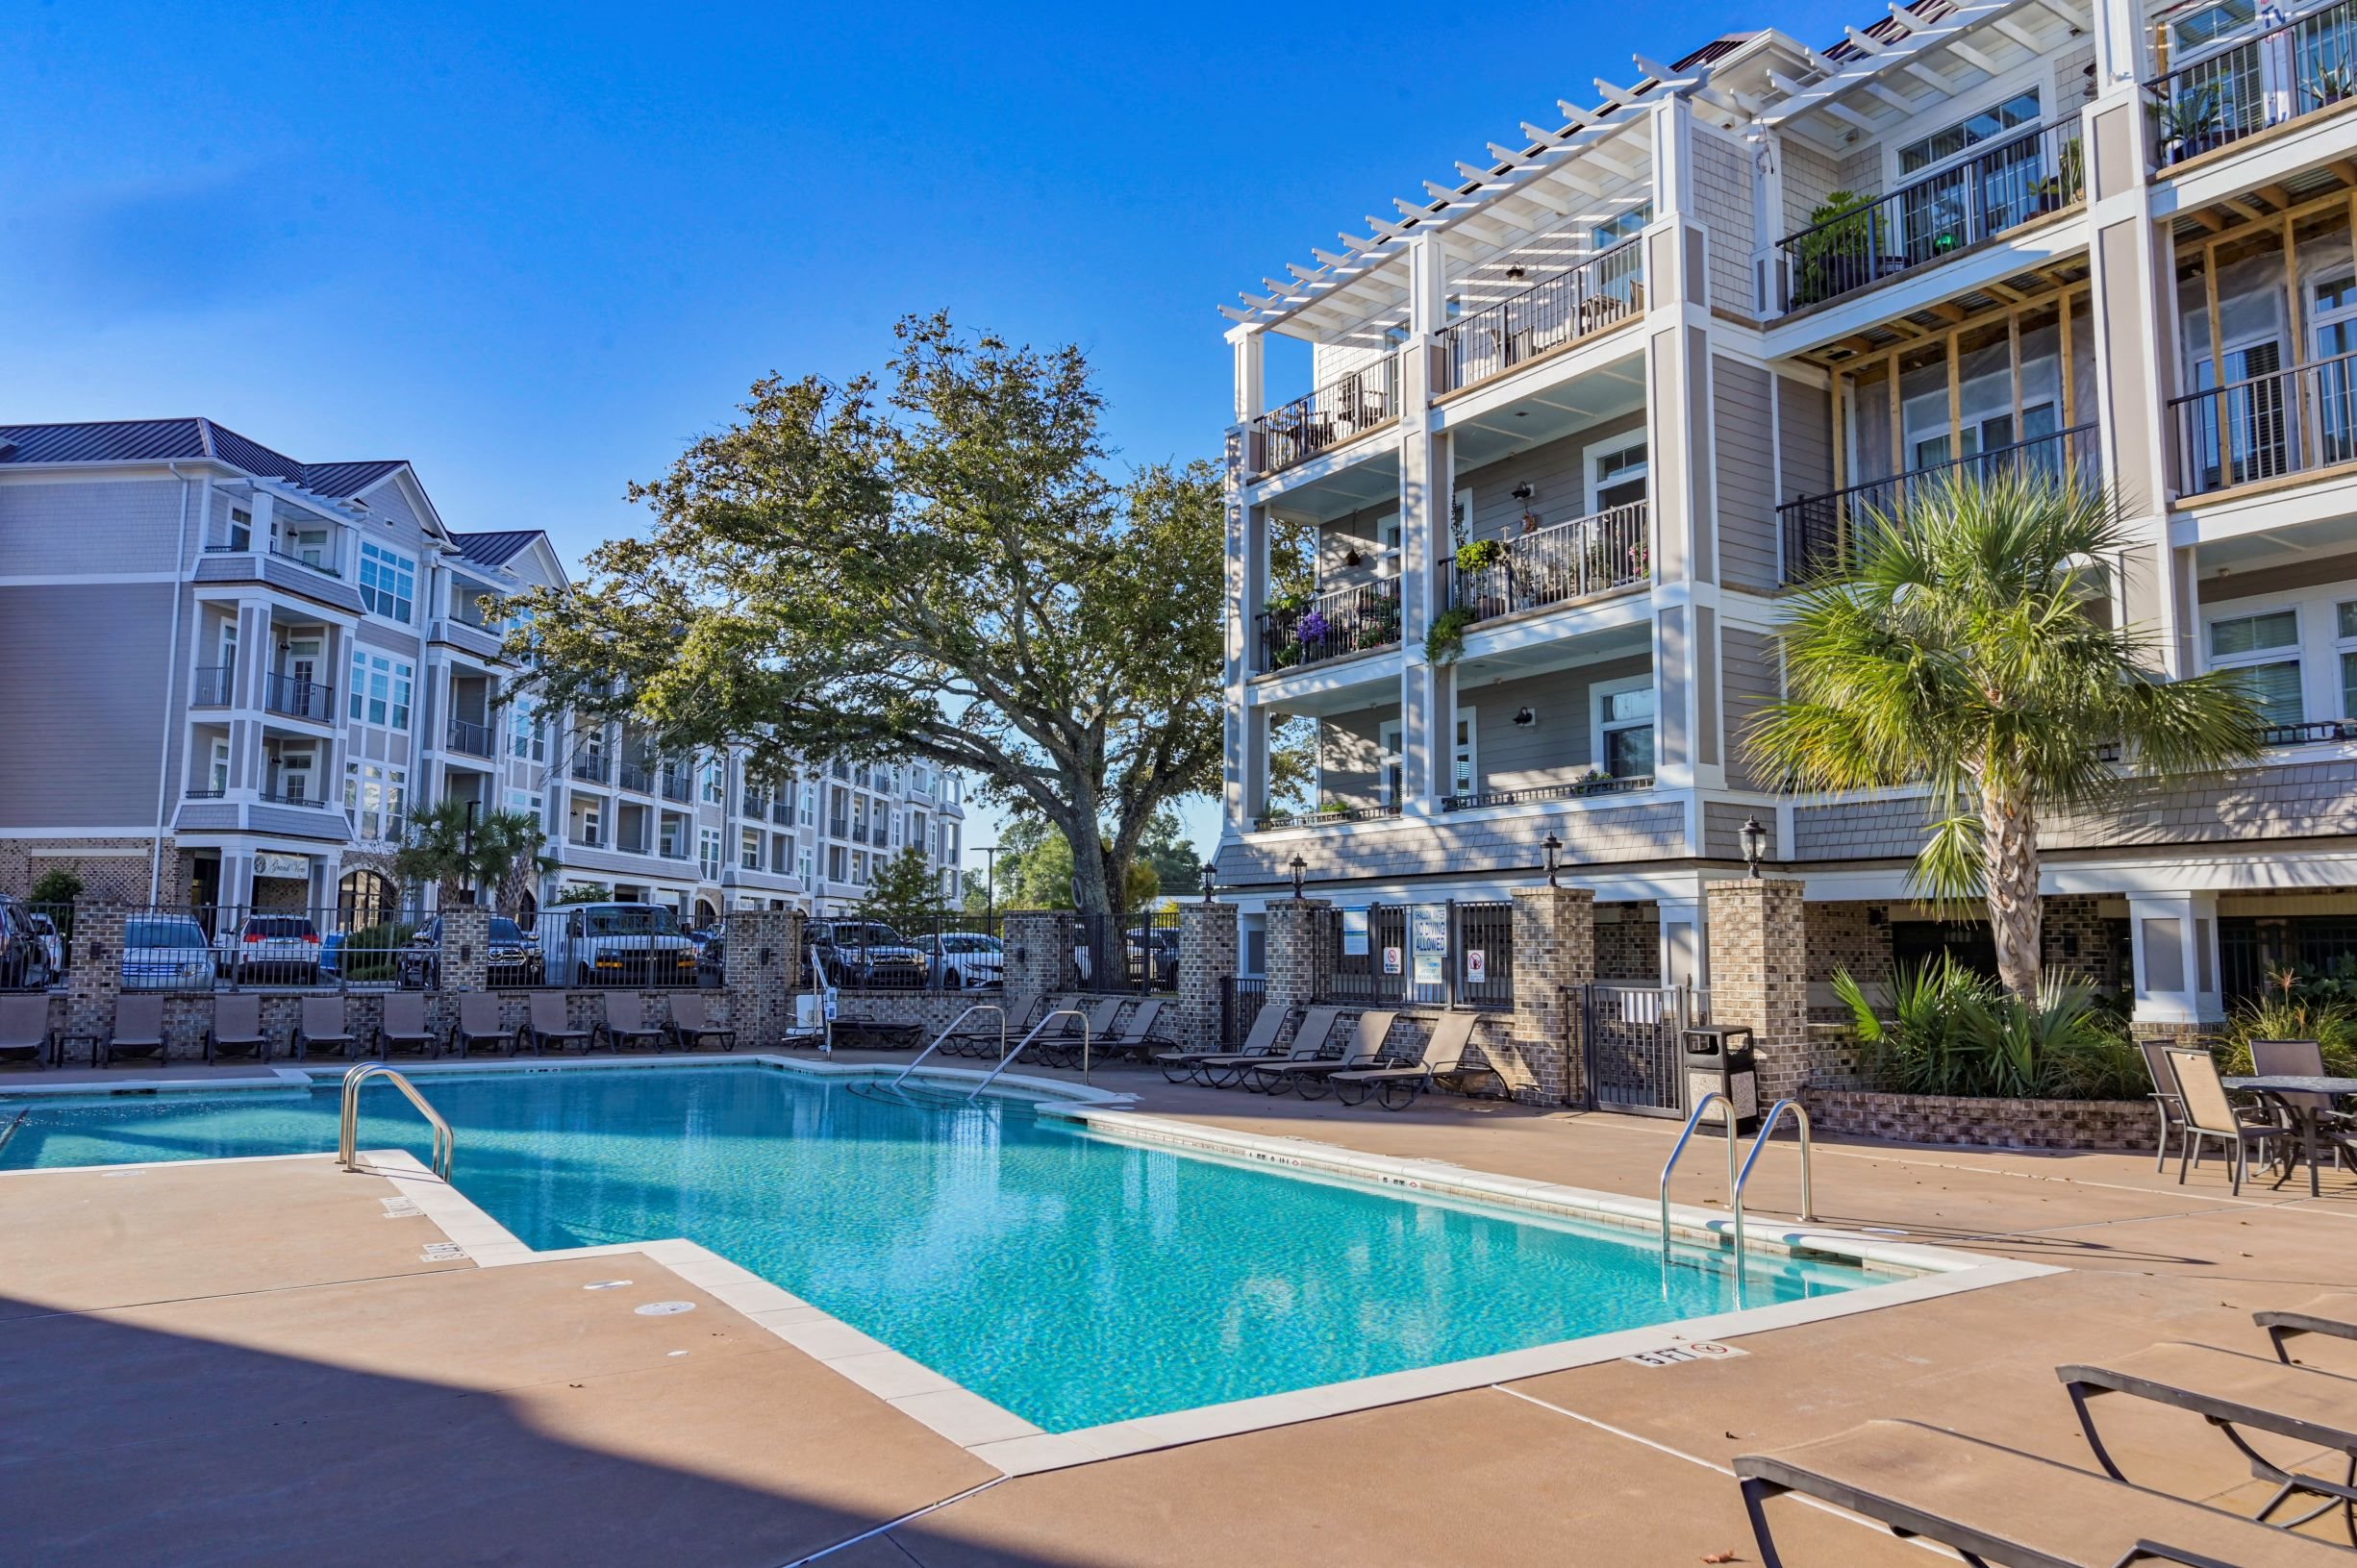 Sparkling Swimming Pool at Grand View Luxury Apartments in Wilmington, NC